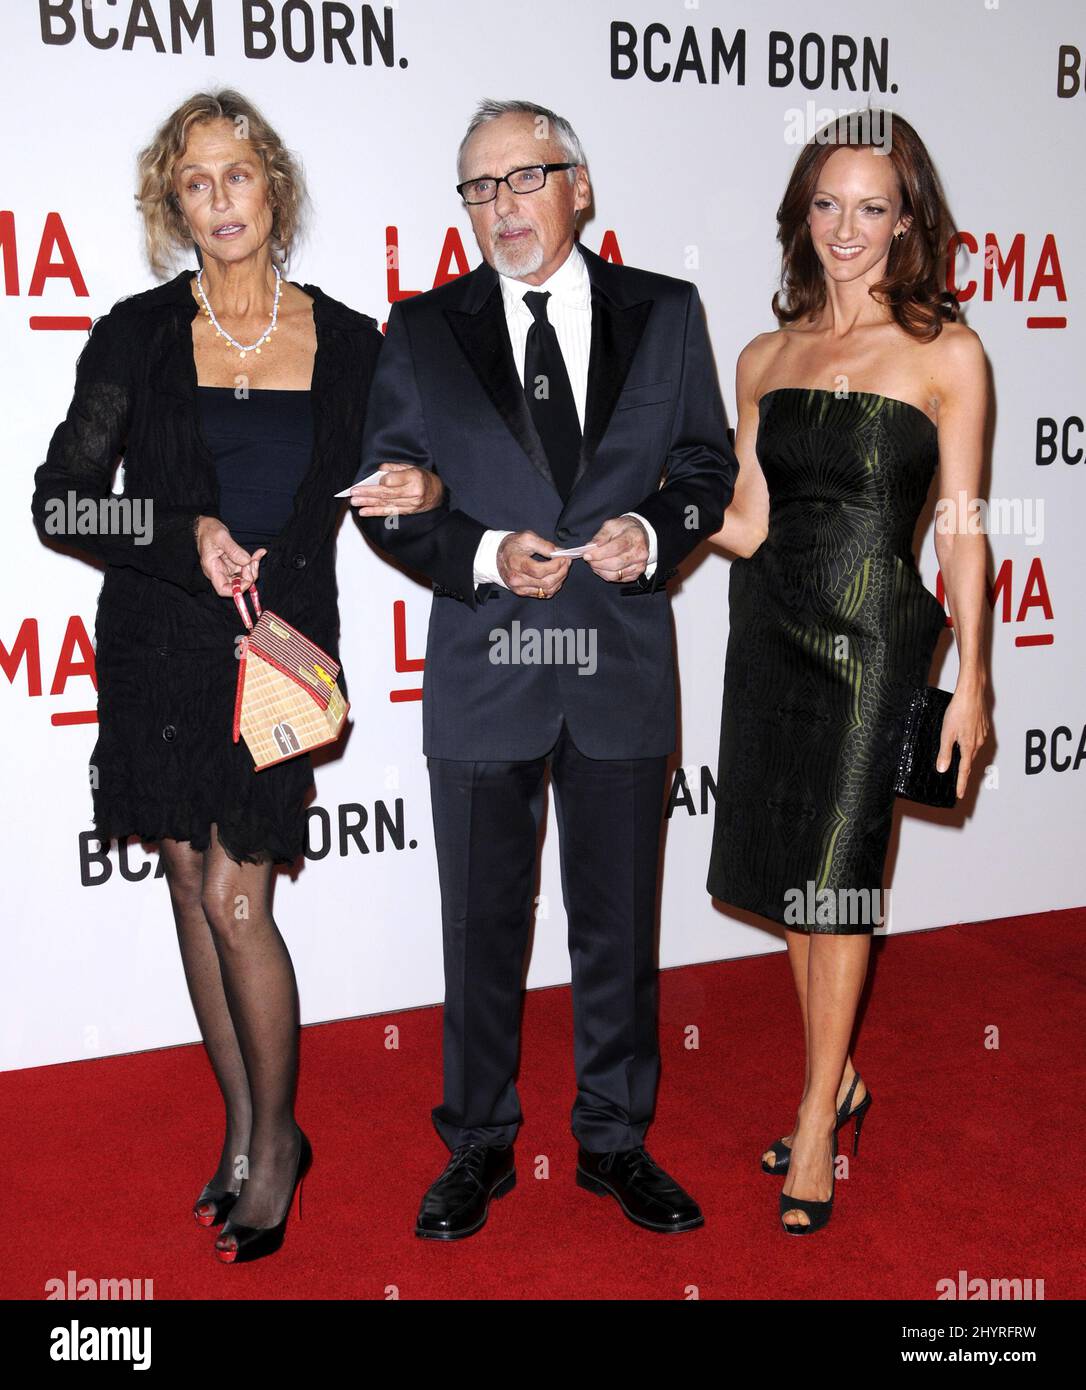 Lauren Hutton, Dennis Hopper and Victoria Duffy attend The Opening Celebration of the Broad Contemporary Art Museum at LACMA in Los Angeles, CA. Stock Photo